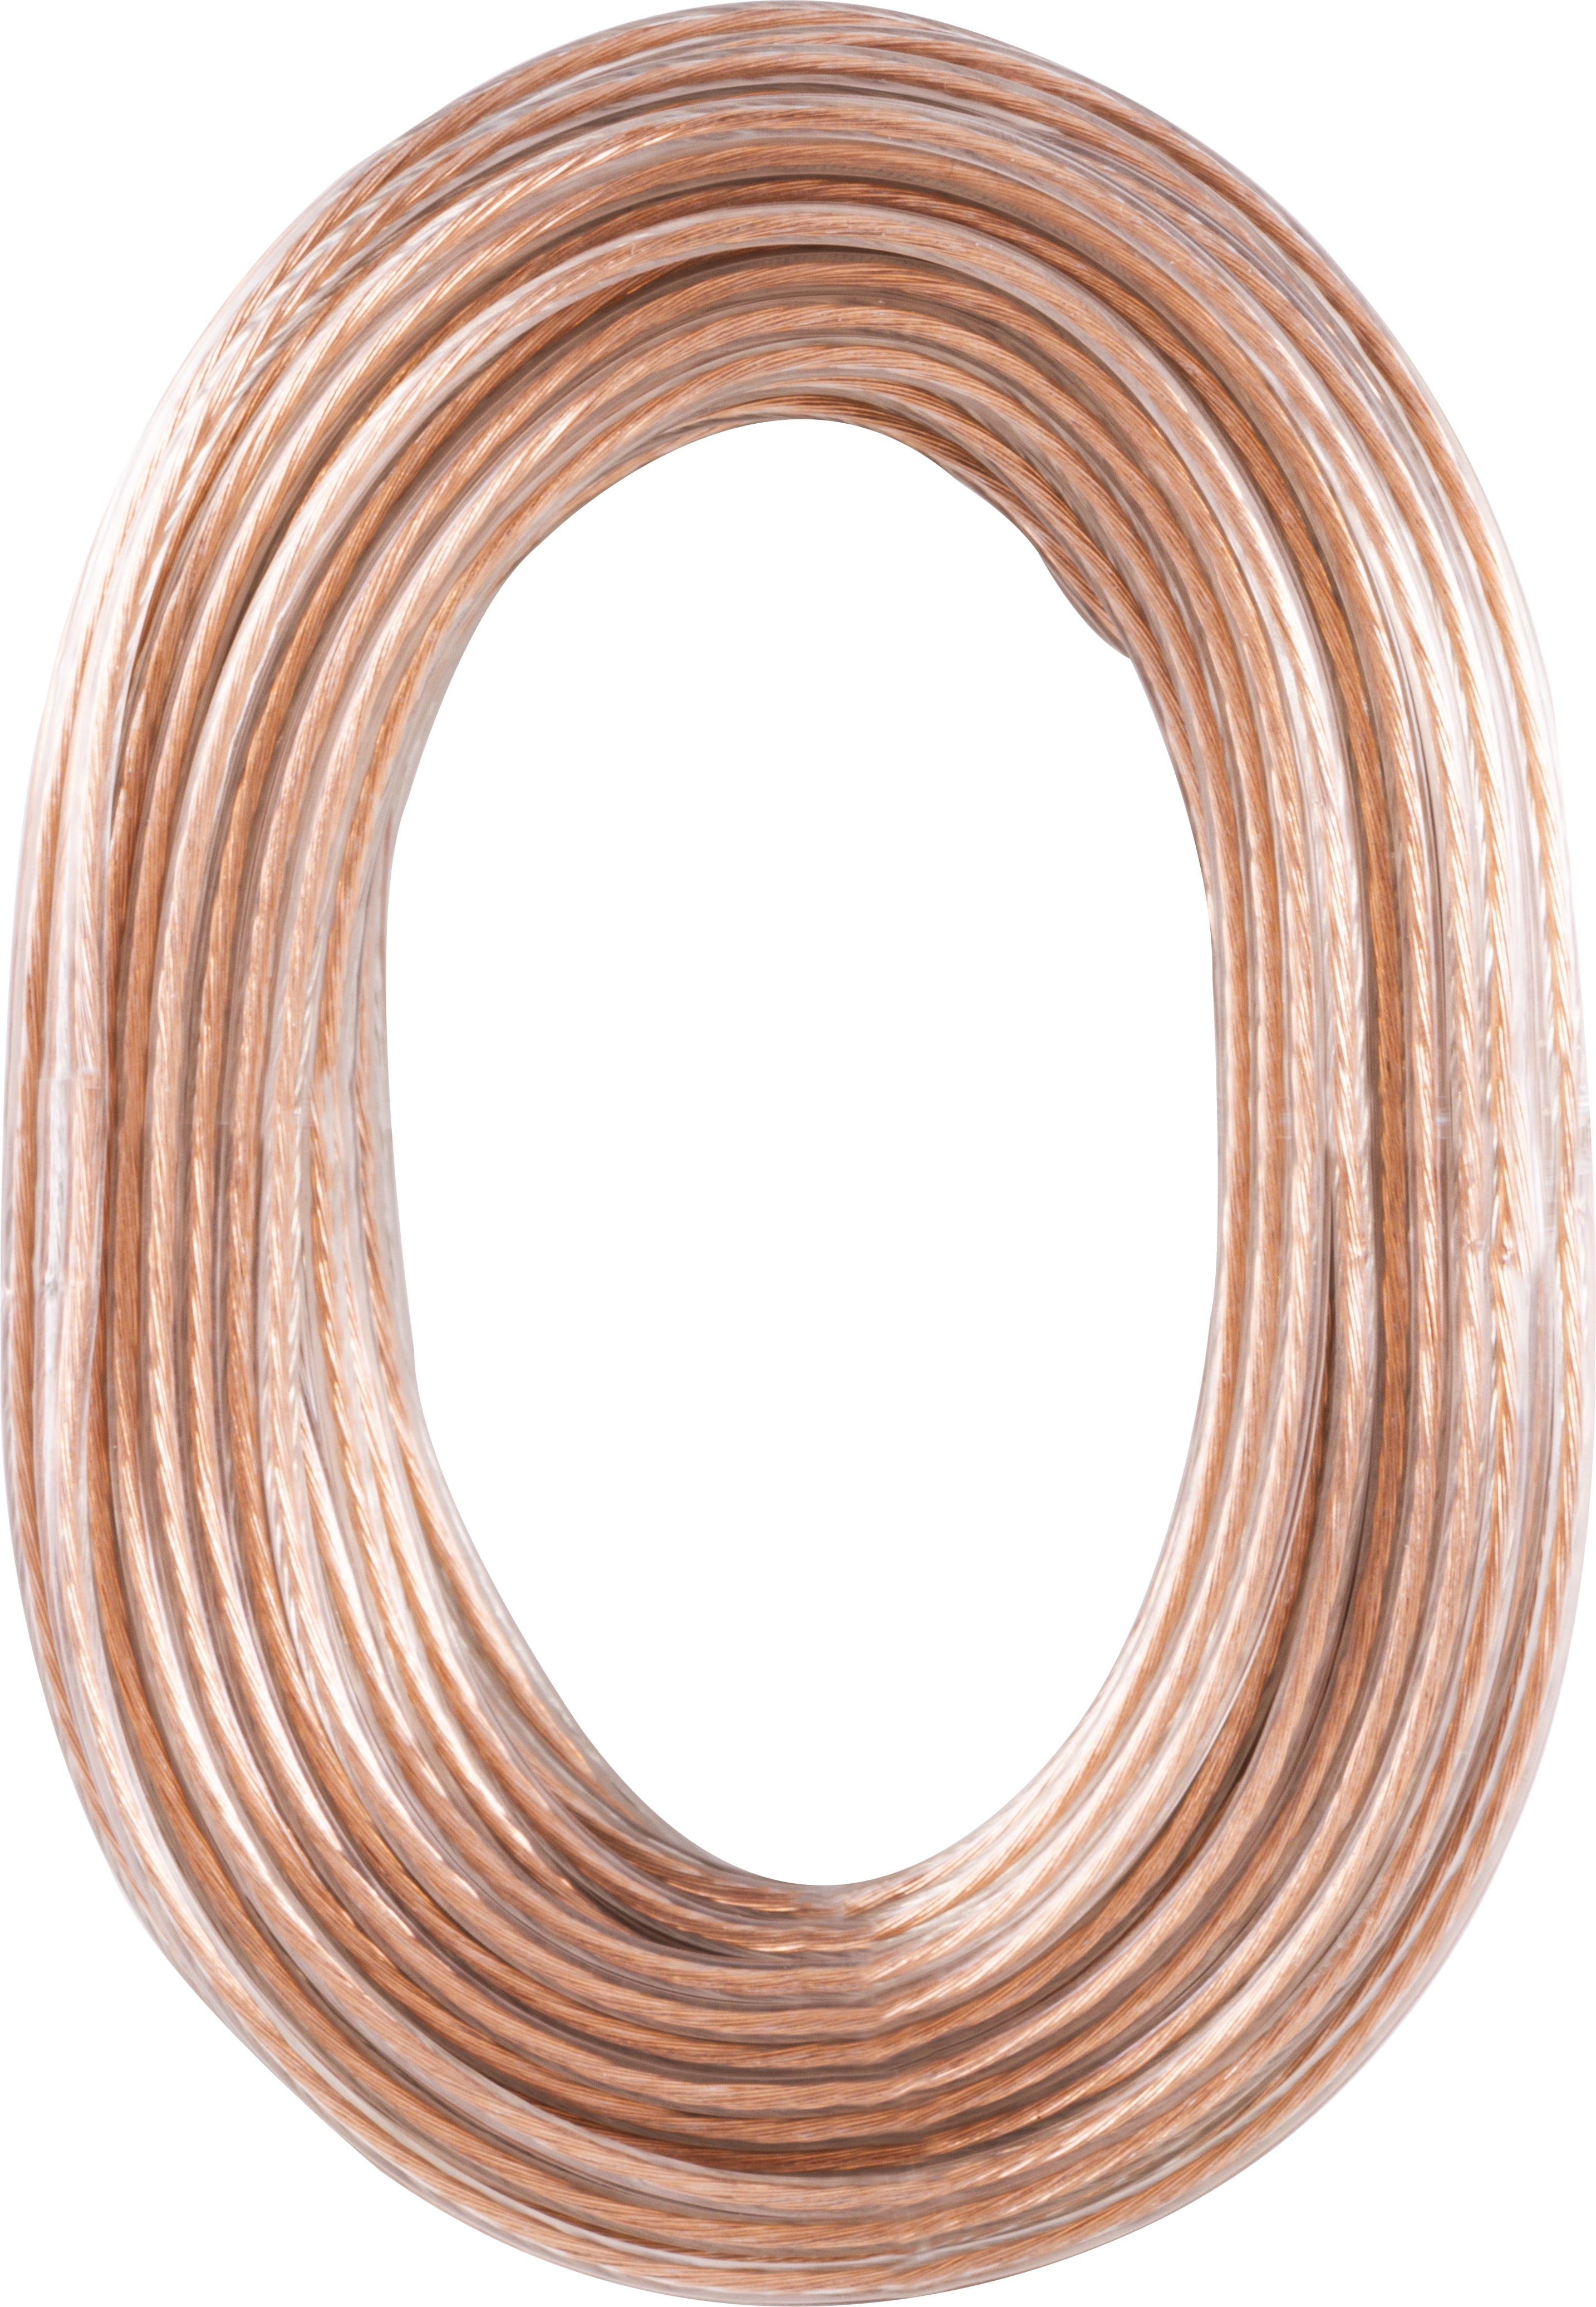 onn. 30' Direct Connection Speaker Wire, Clear